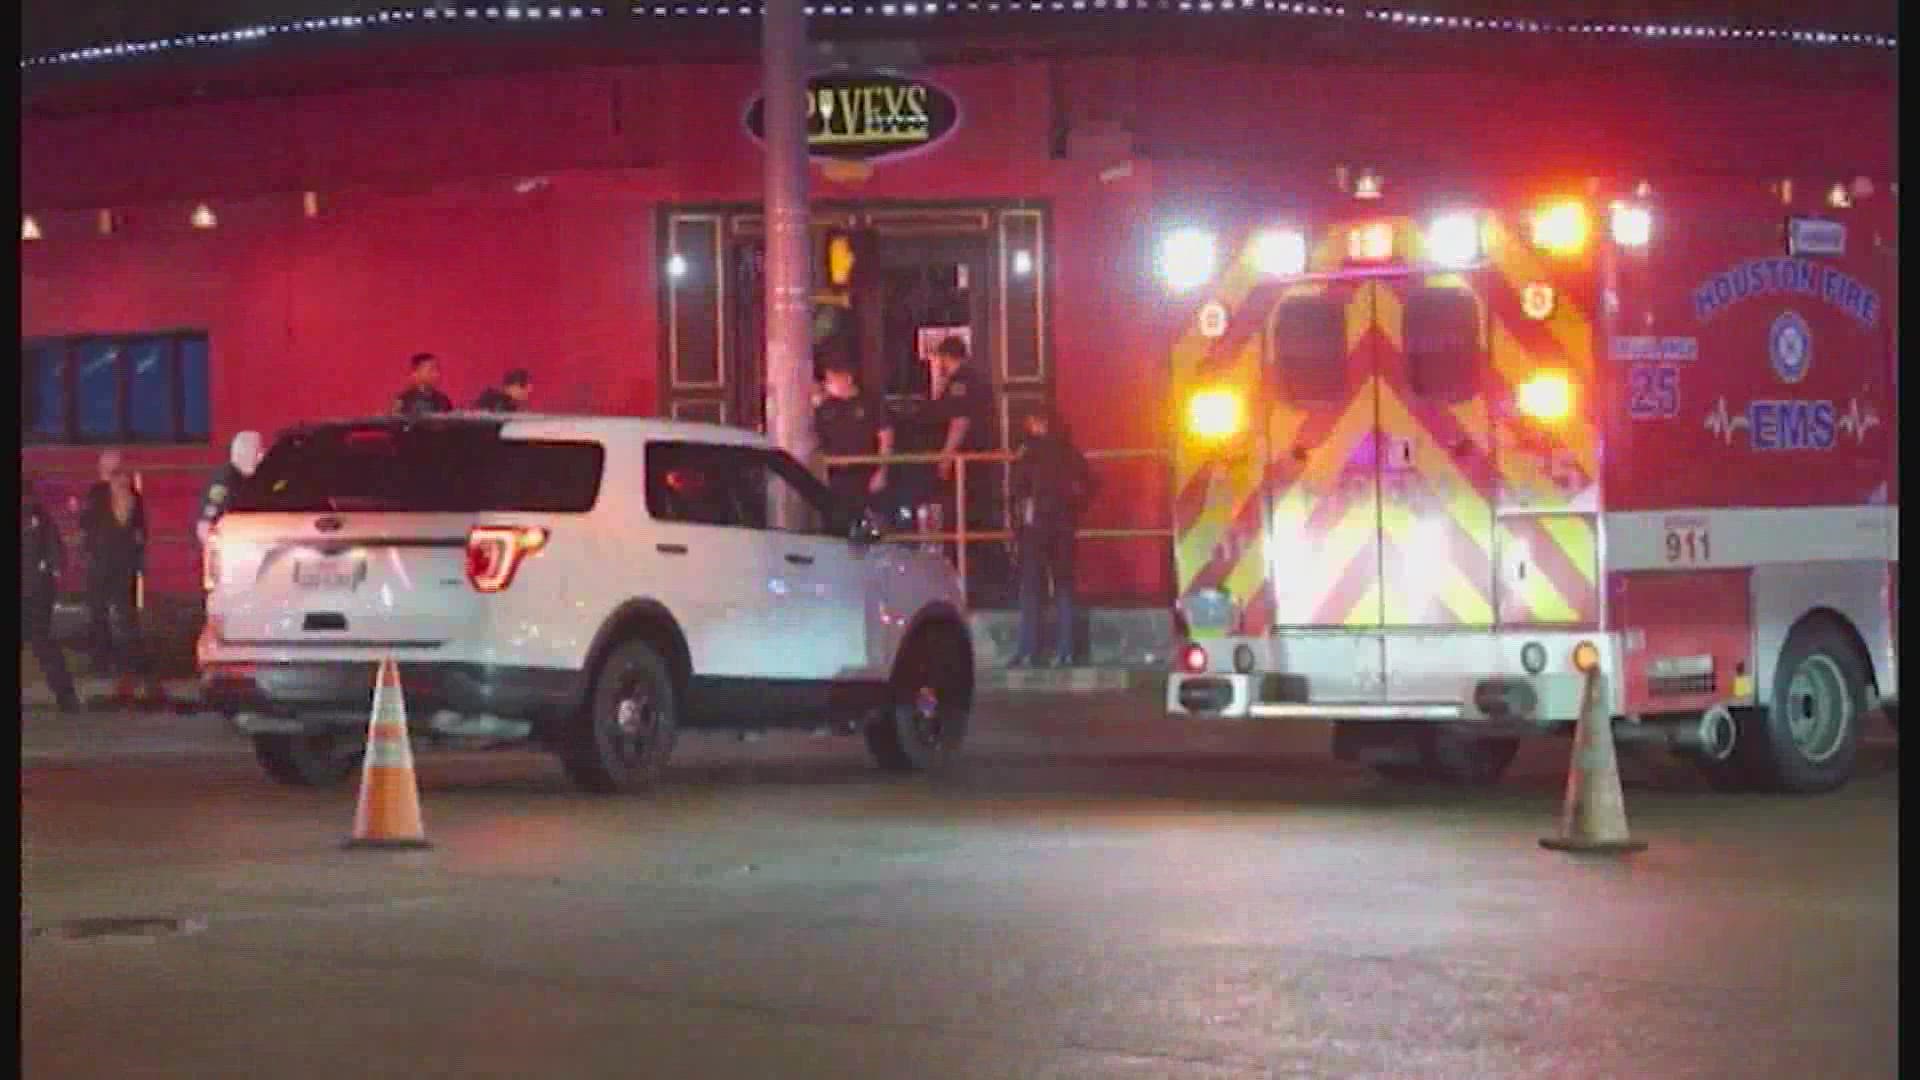 Five men, including a bouncer, were injured during a shooting outside of a nightclub in the Third Ward early Thursday, according to Houston police.